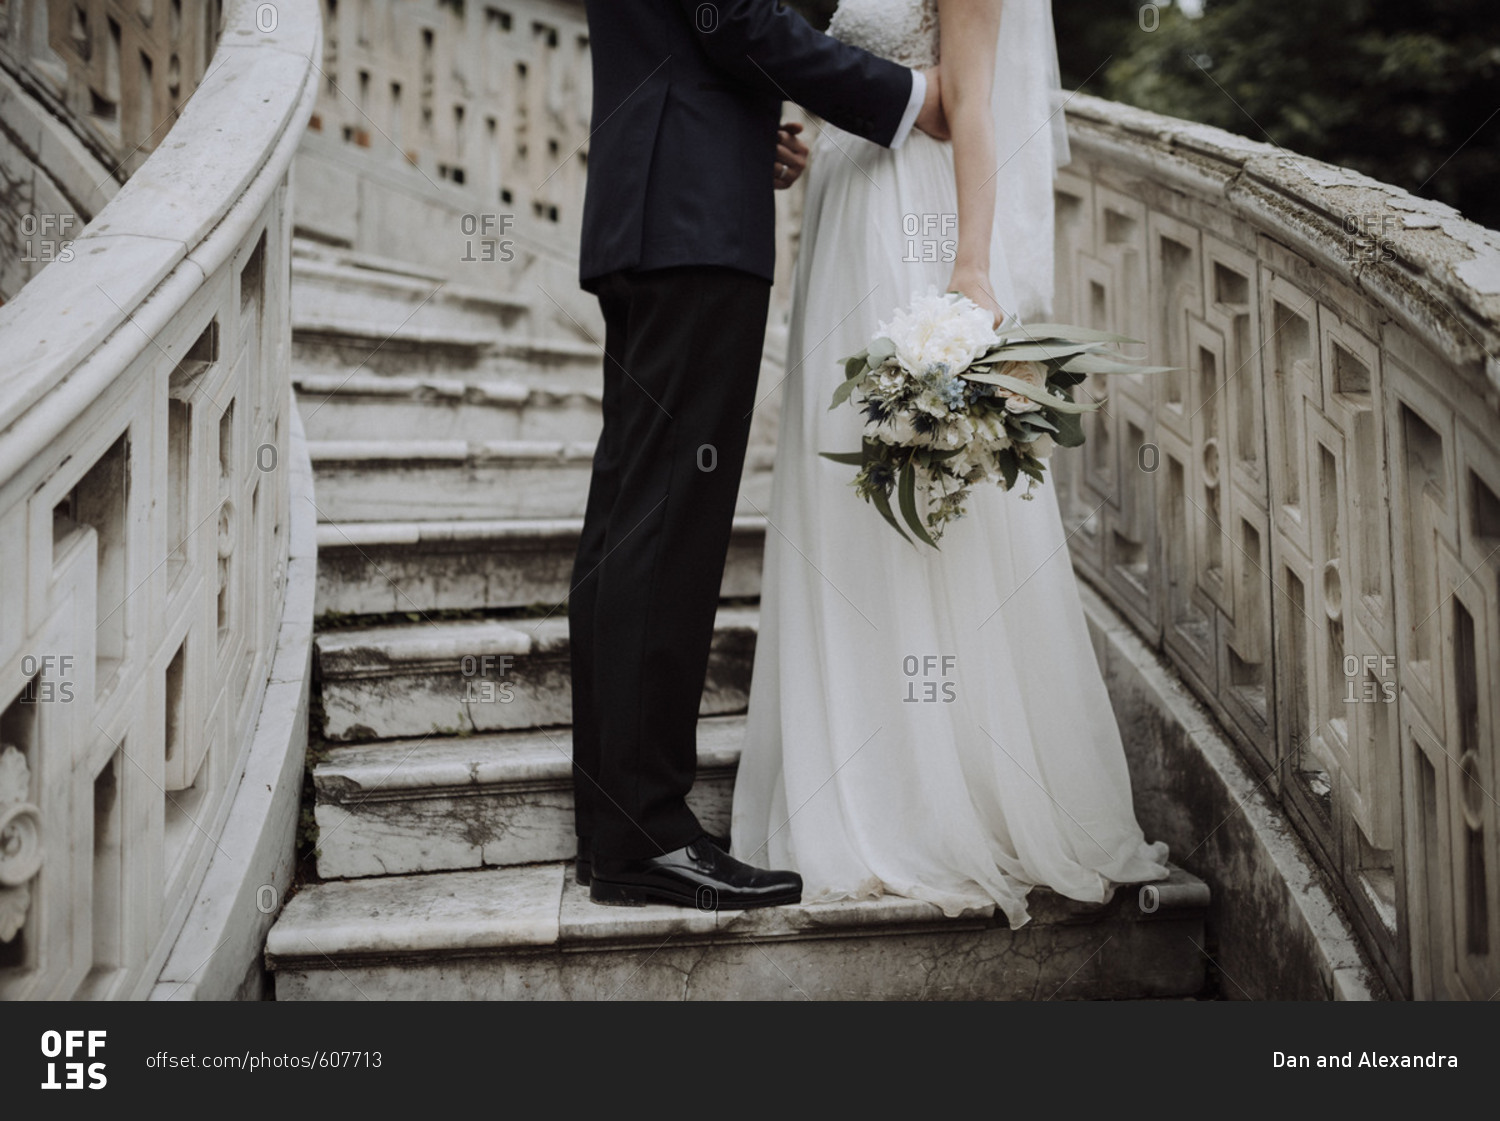 Groom standing on staircase next to bride holding wedding bouquet